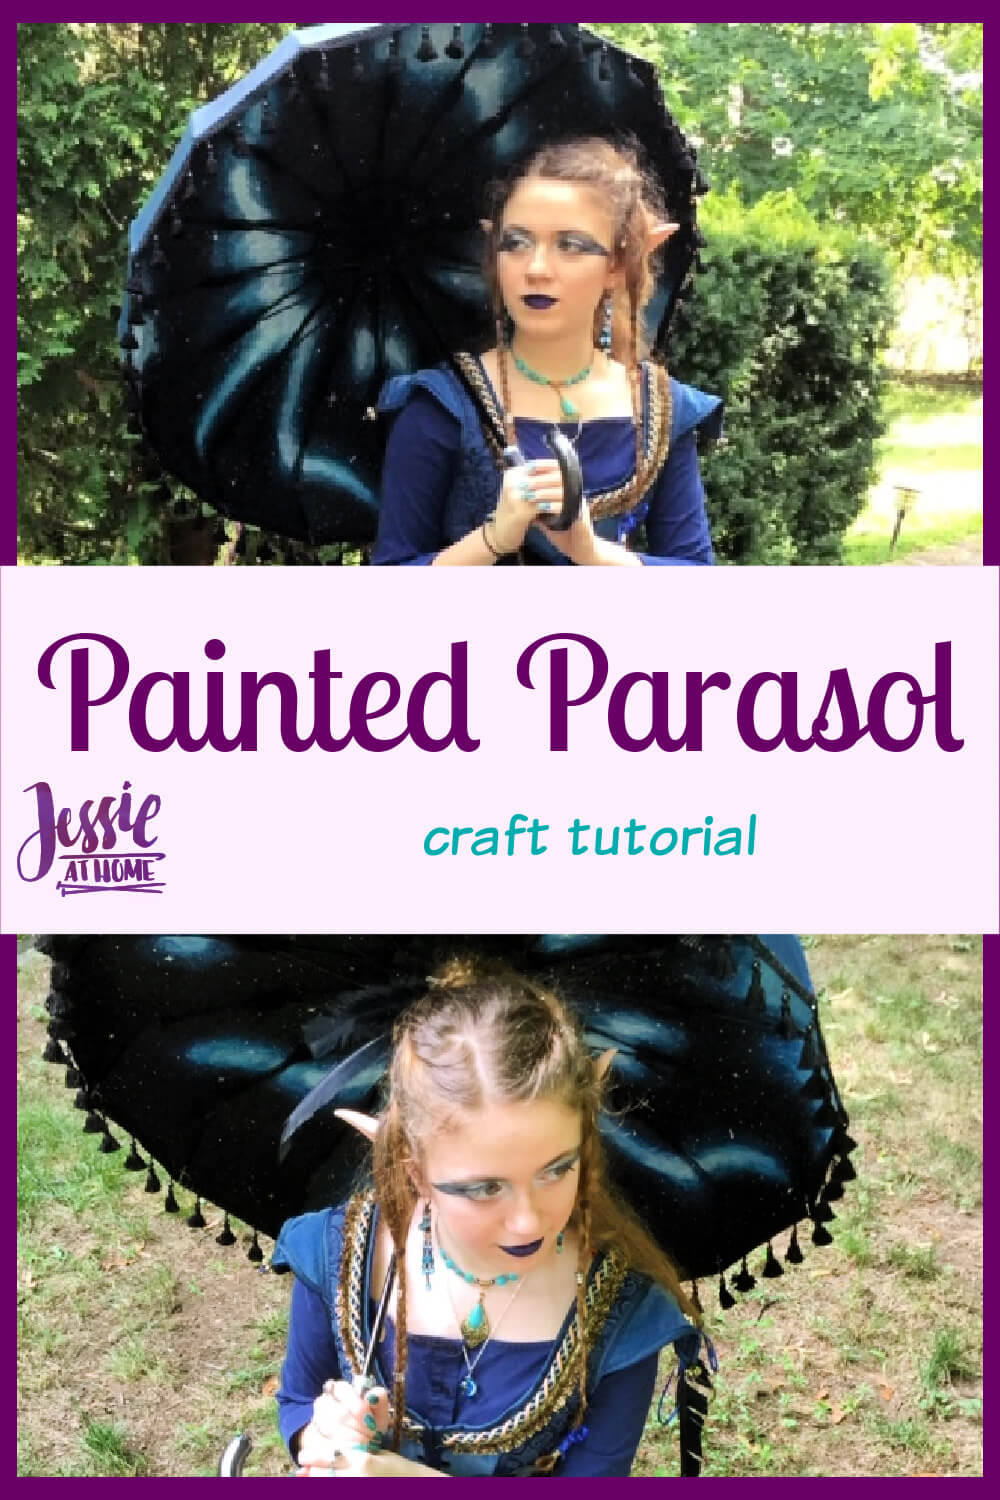 Painted Parasol  - Get mystical with Plaid FX paints and a special guest!